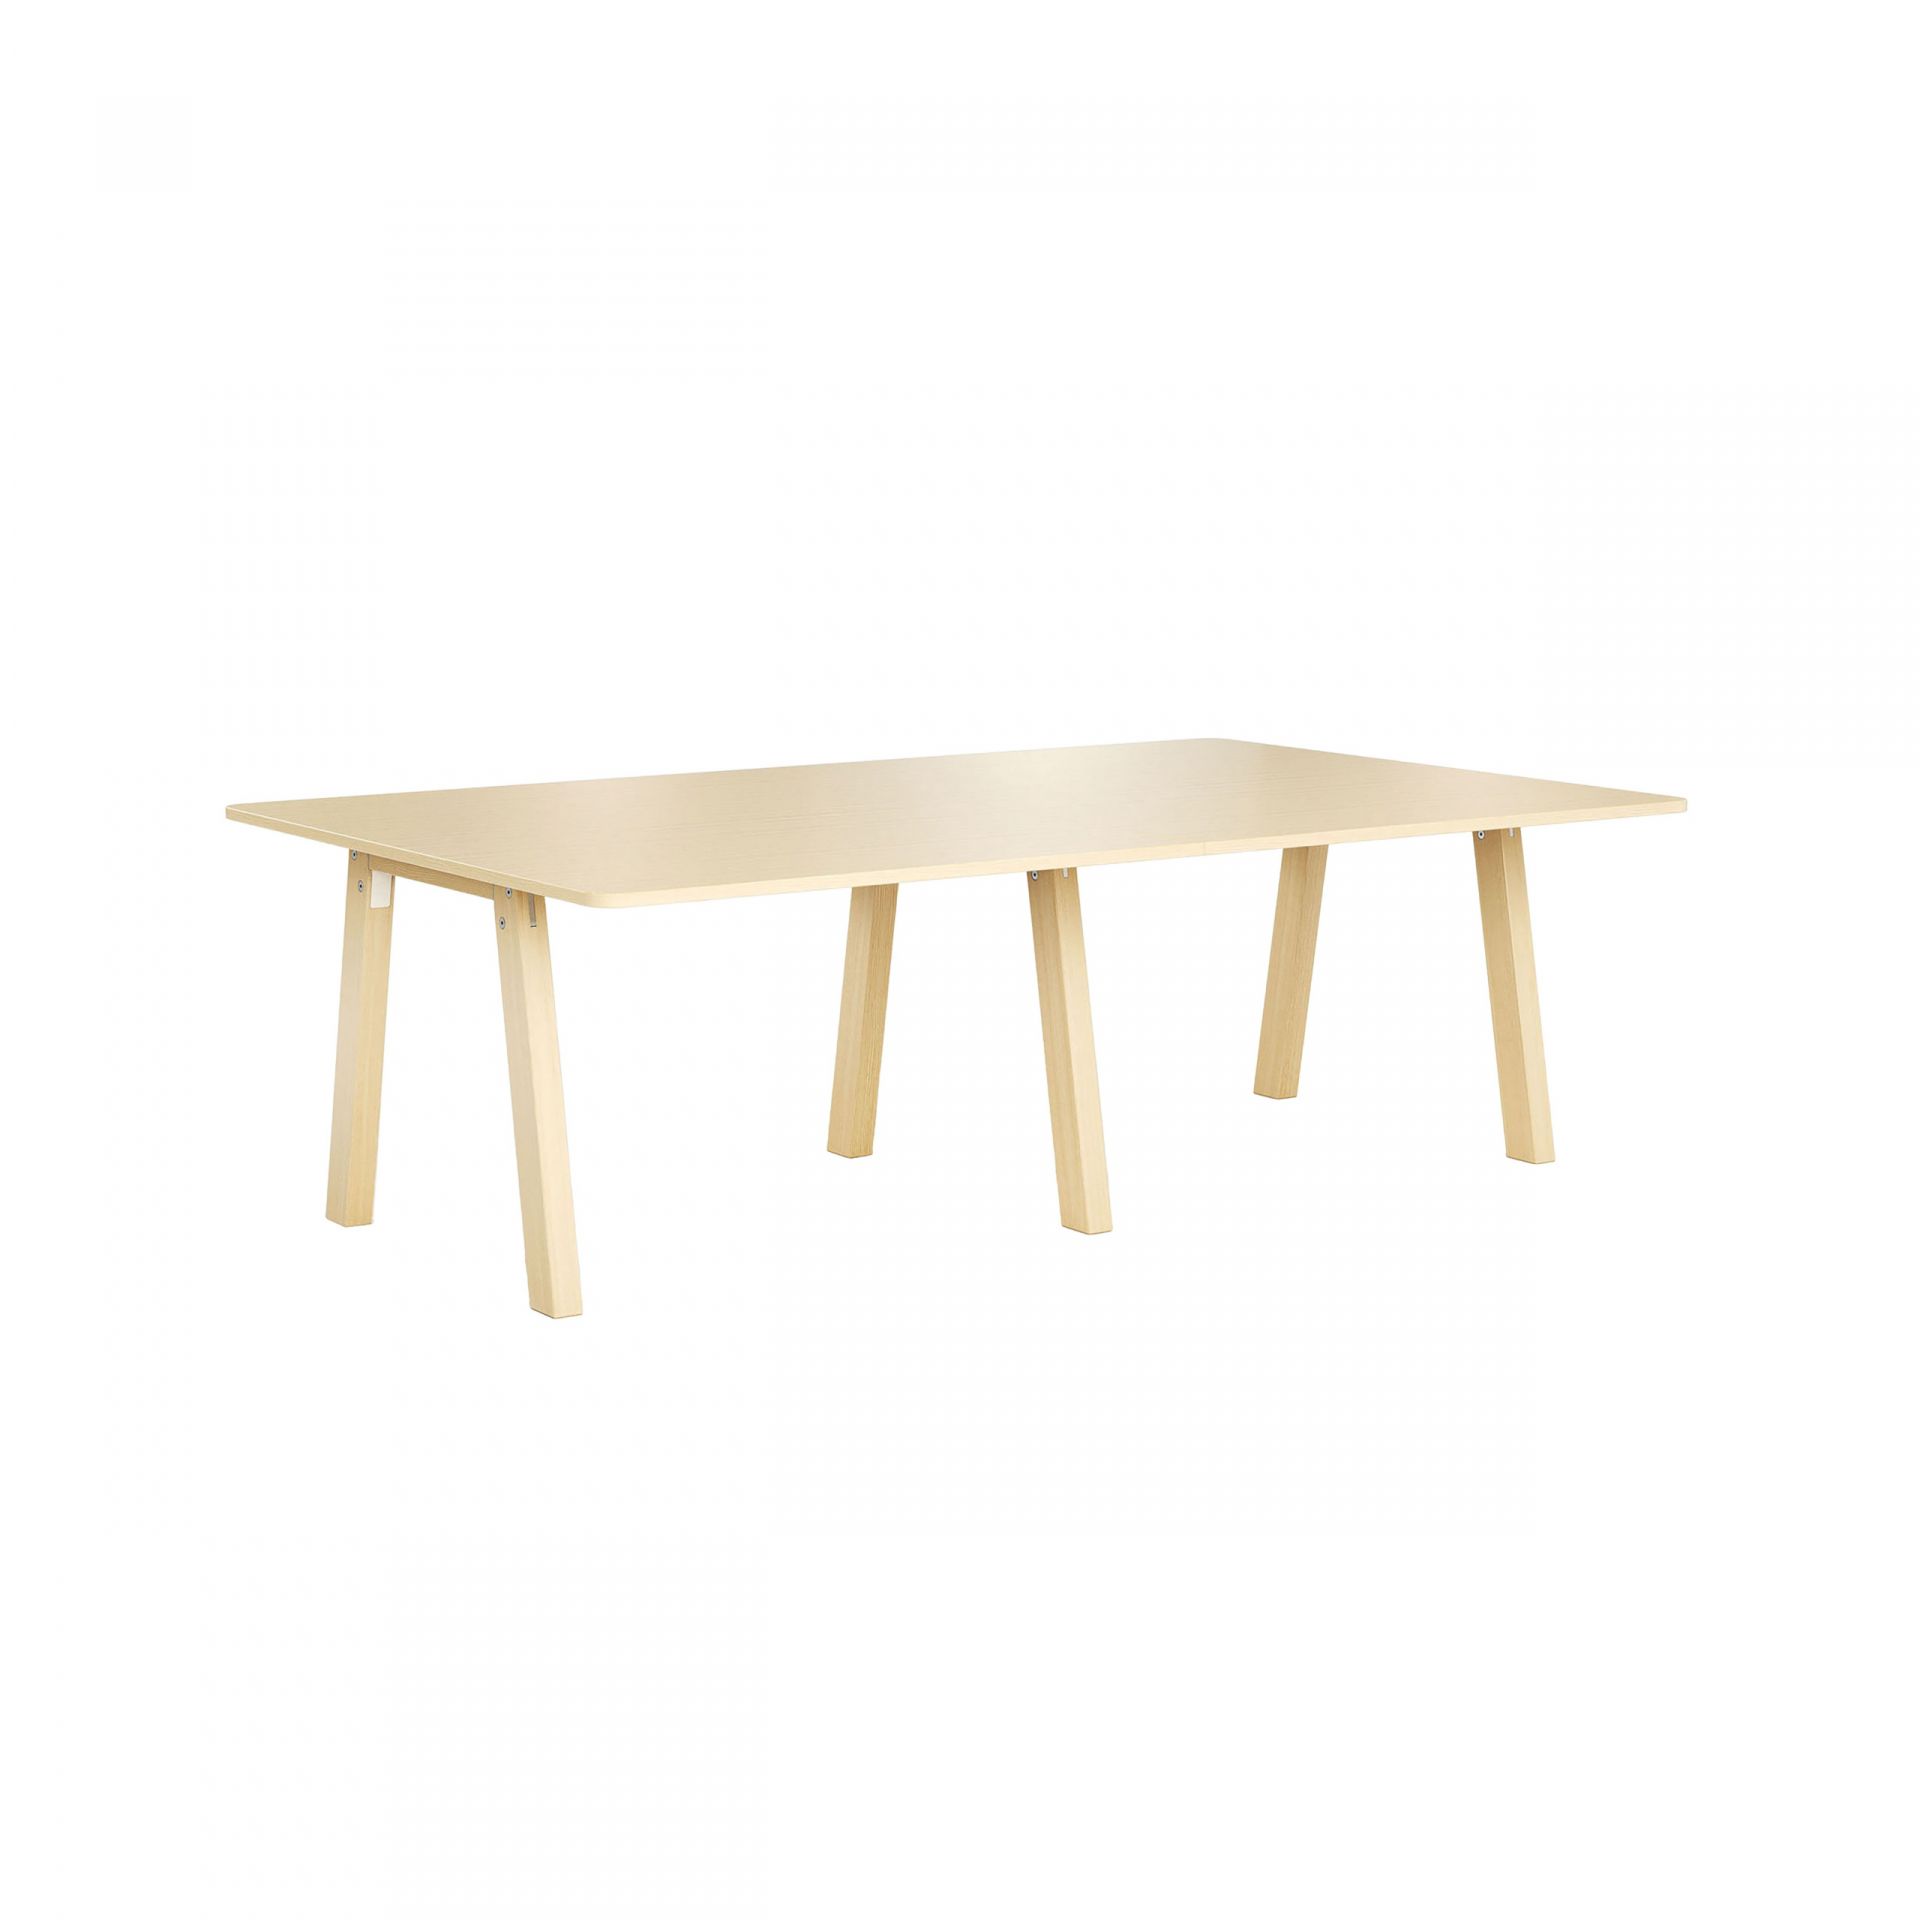 Collaborate Table with wooden legs